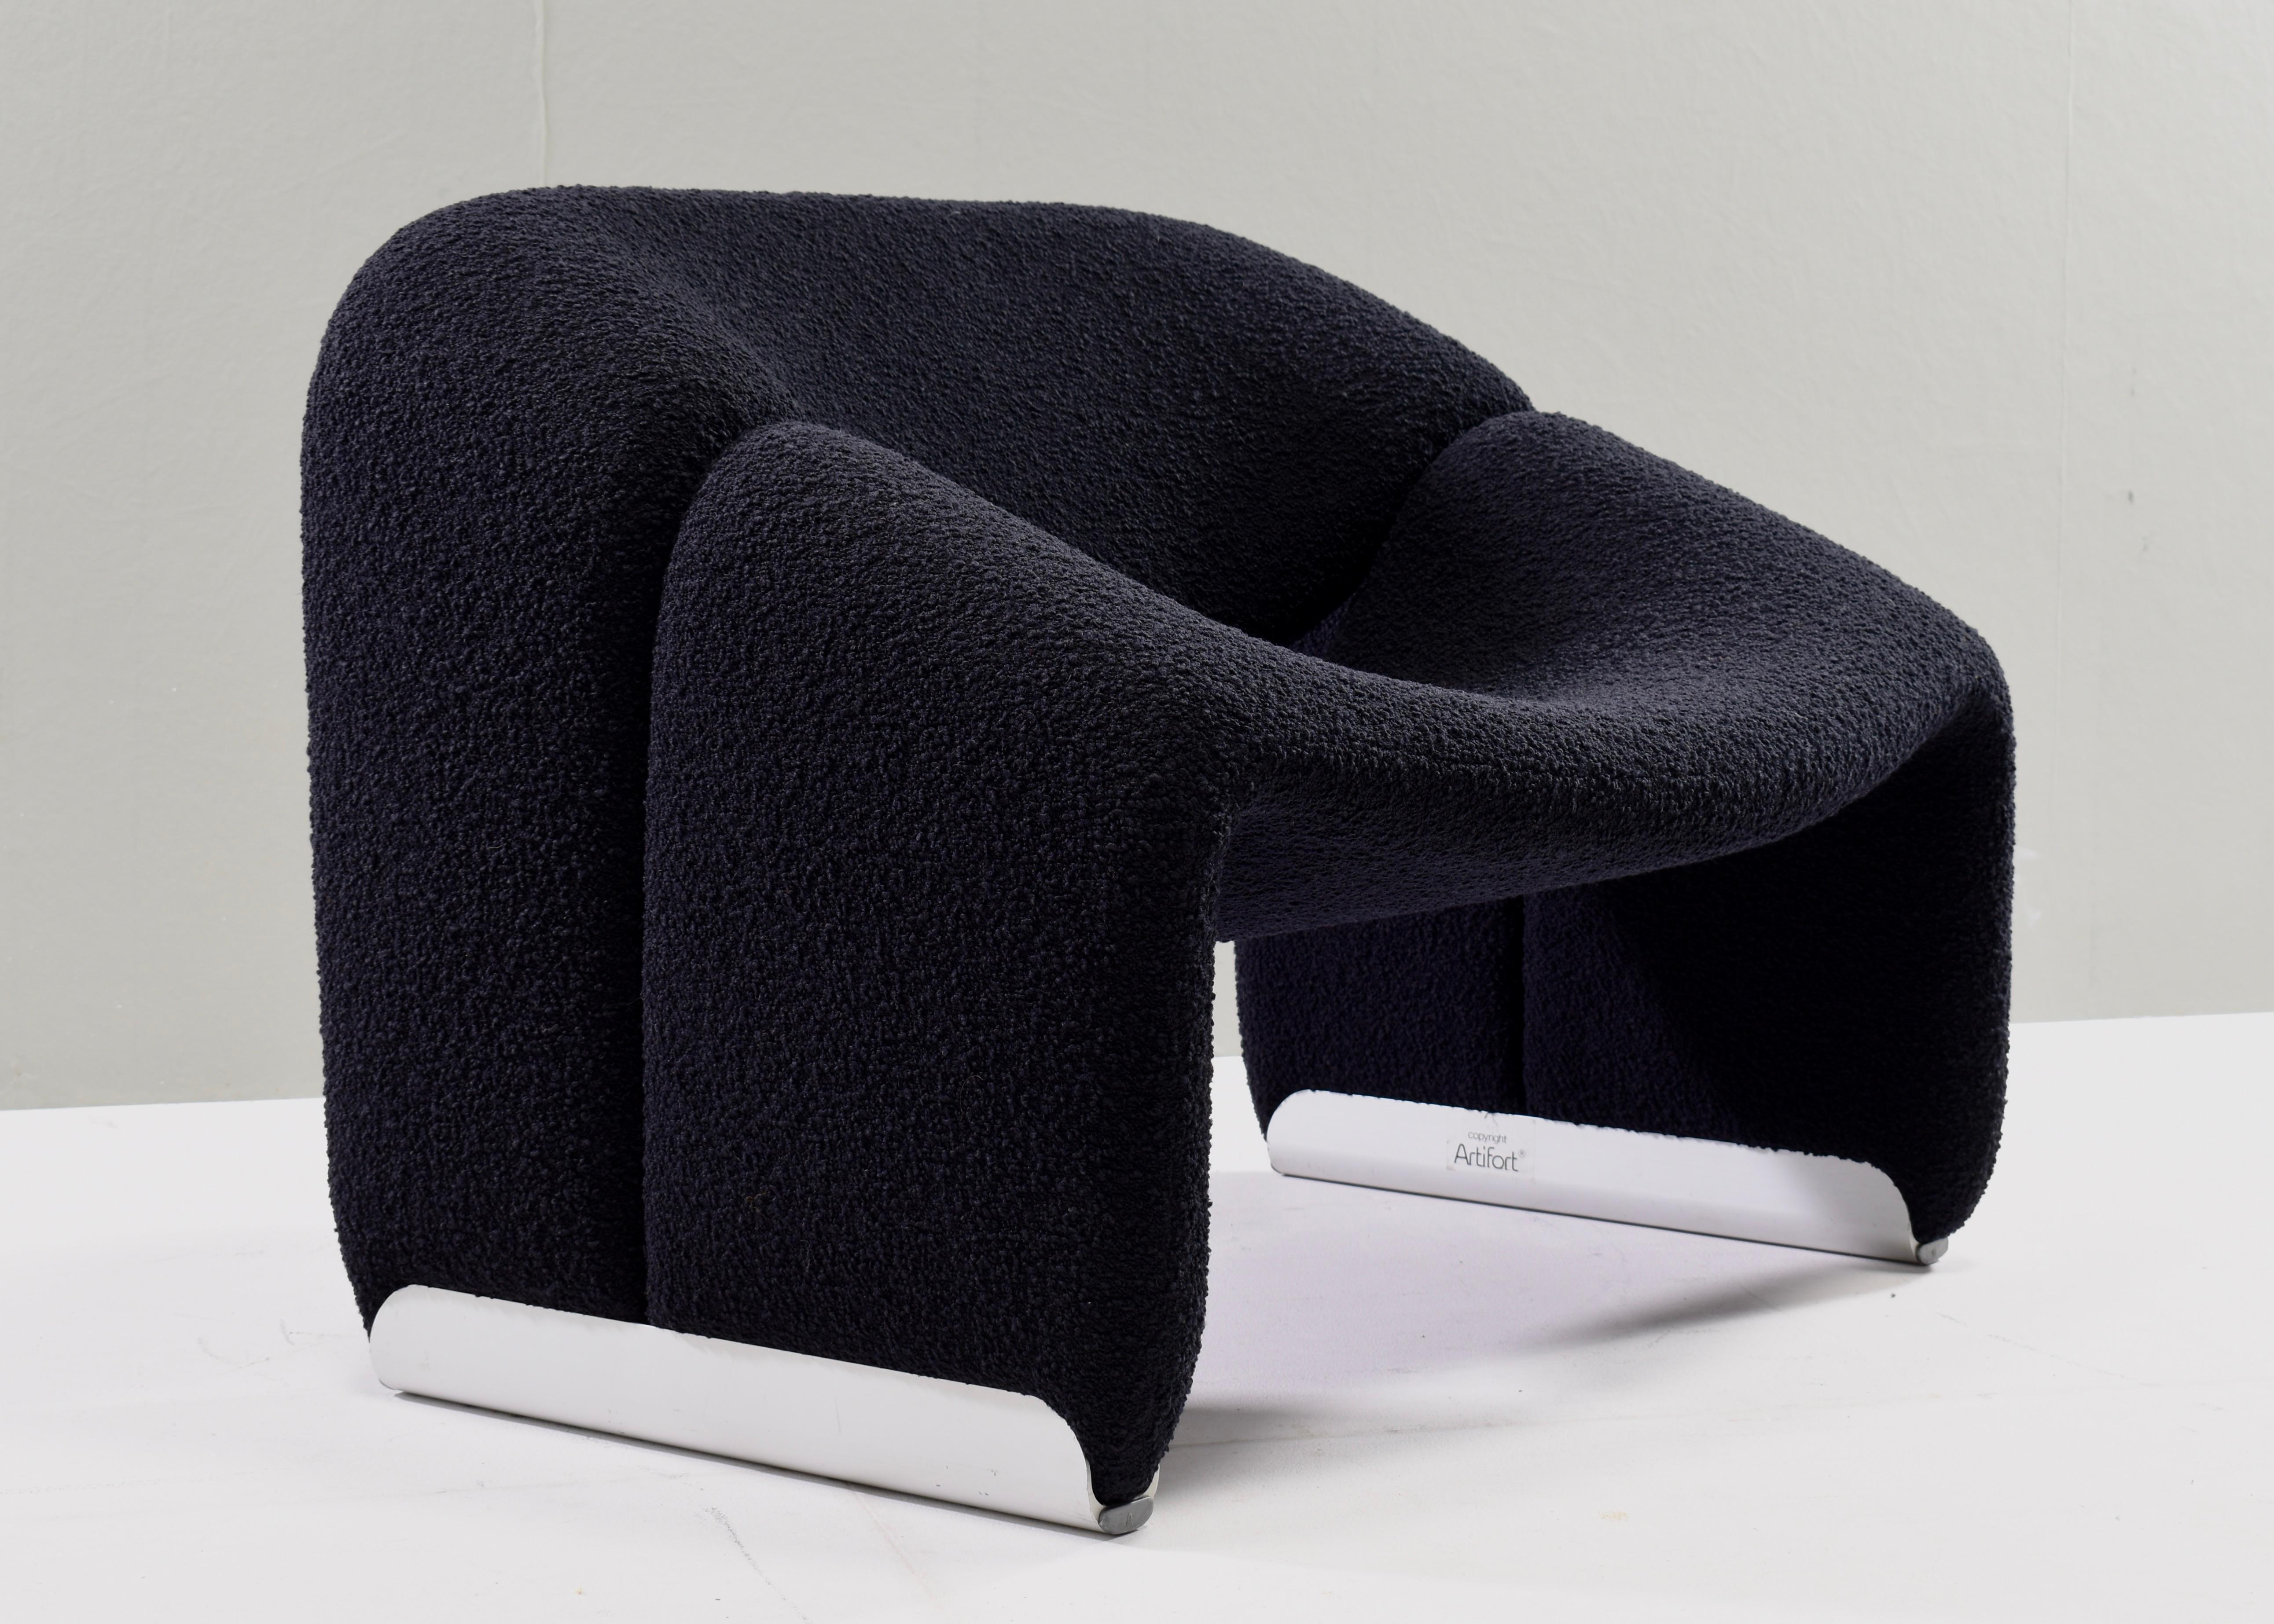 Late 20th Century Pierre Paulin F598 Groovy Armchair for Artifort New Upholstery Netherlands, 1972